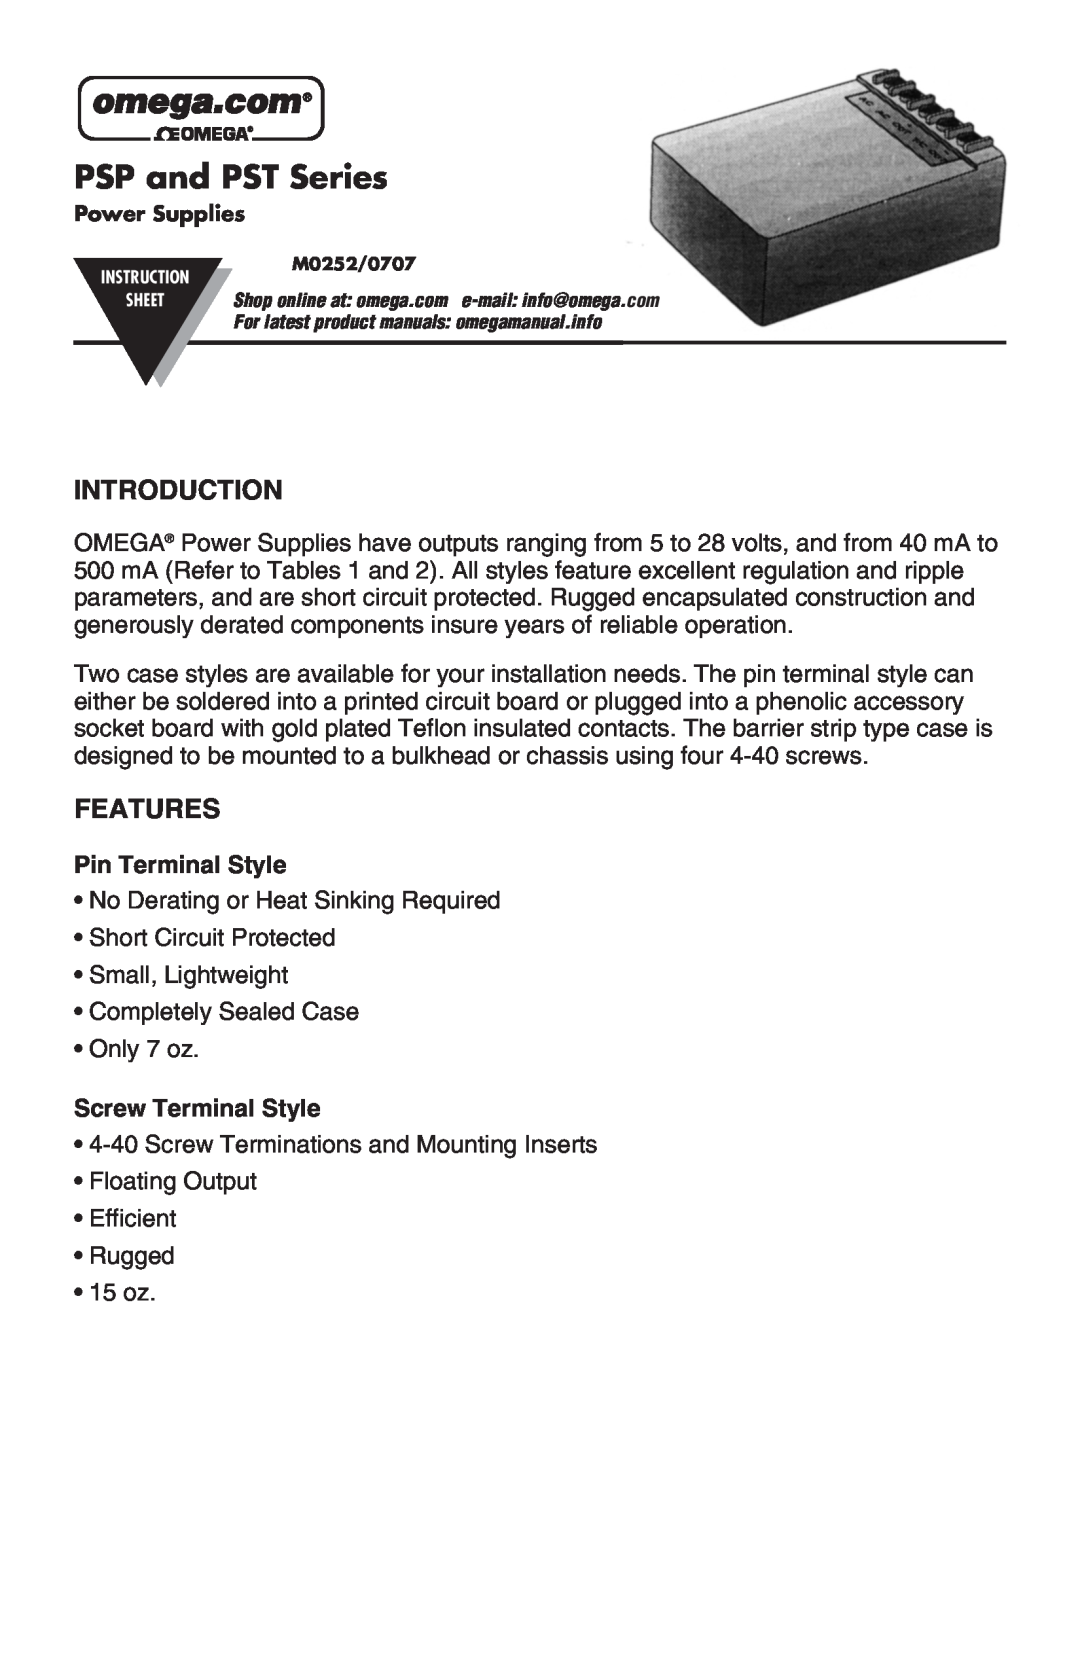 Omega Engineering instruction sheet Introduction, Features, PSP and PST Series 